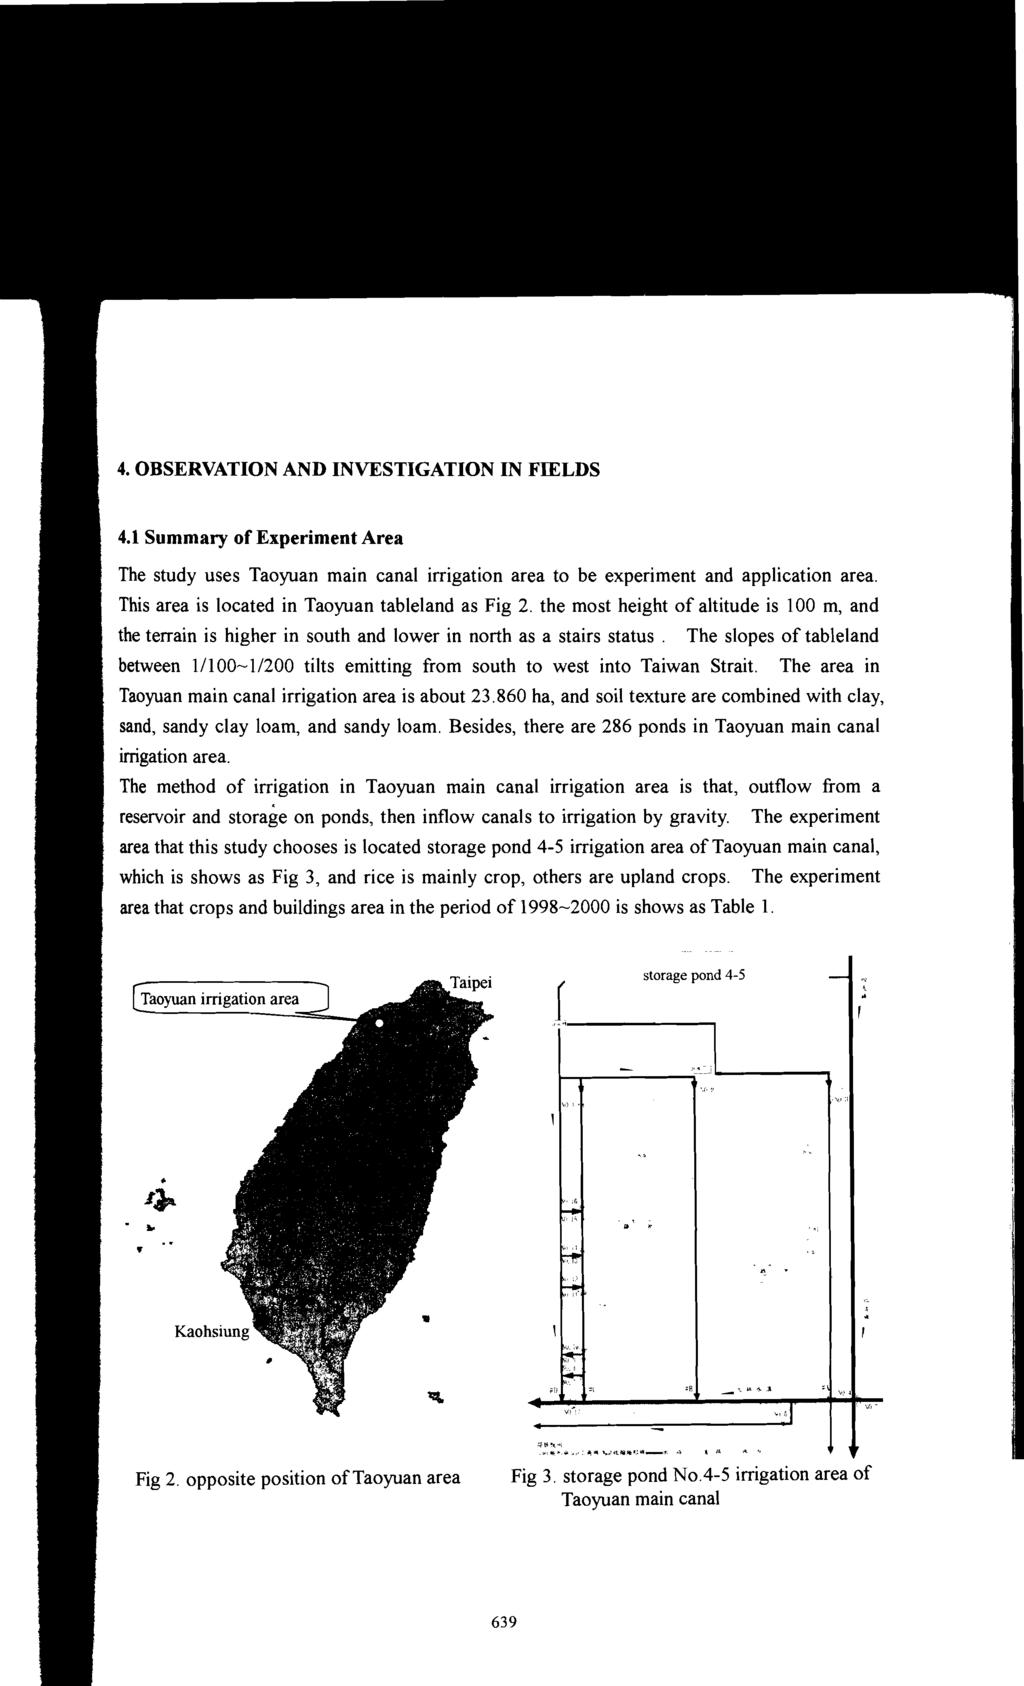 4. OBSERVATION AND INVESTIGATION IN FIELDS 4.1 Summary of Experiment Area The study uses Taoyuan main canal irrigation area to be experiment and application area.